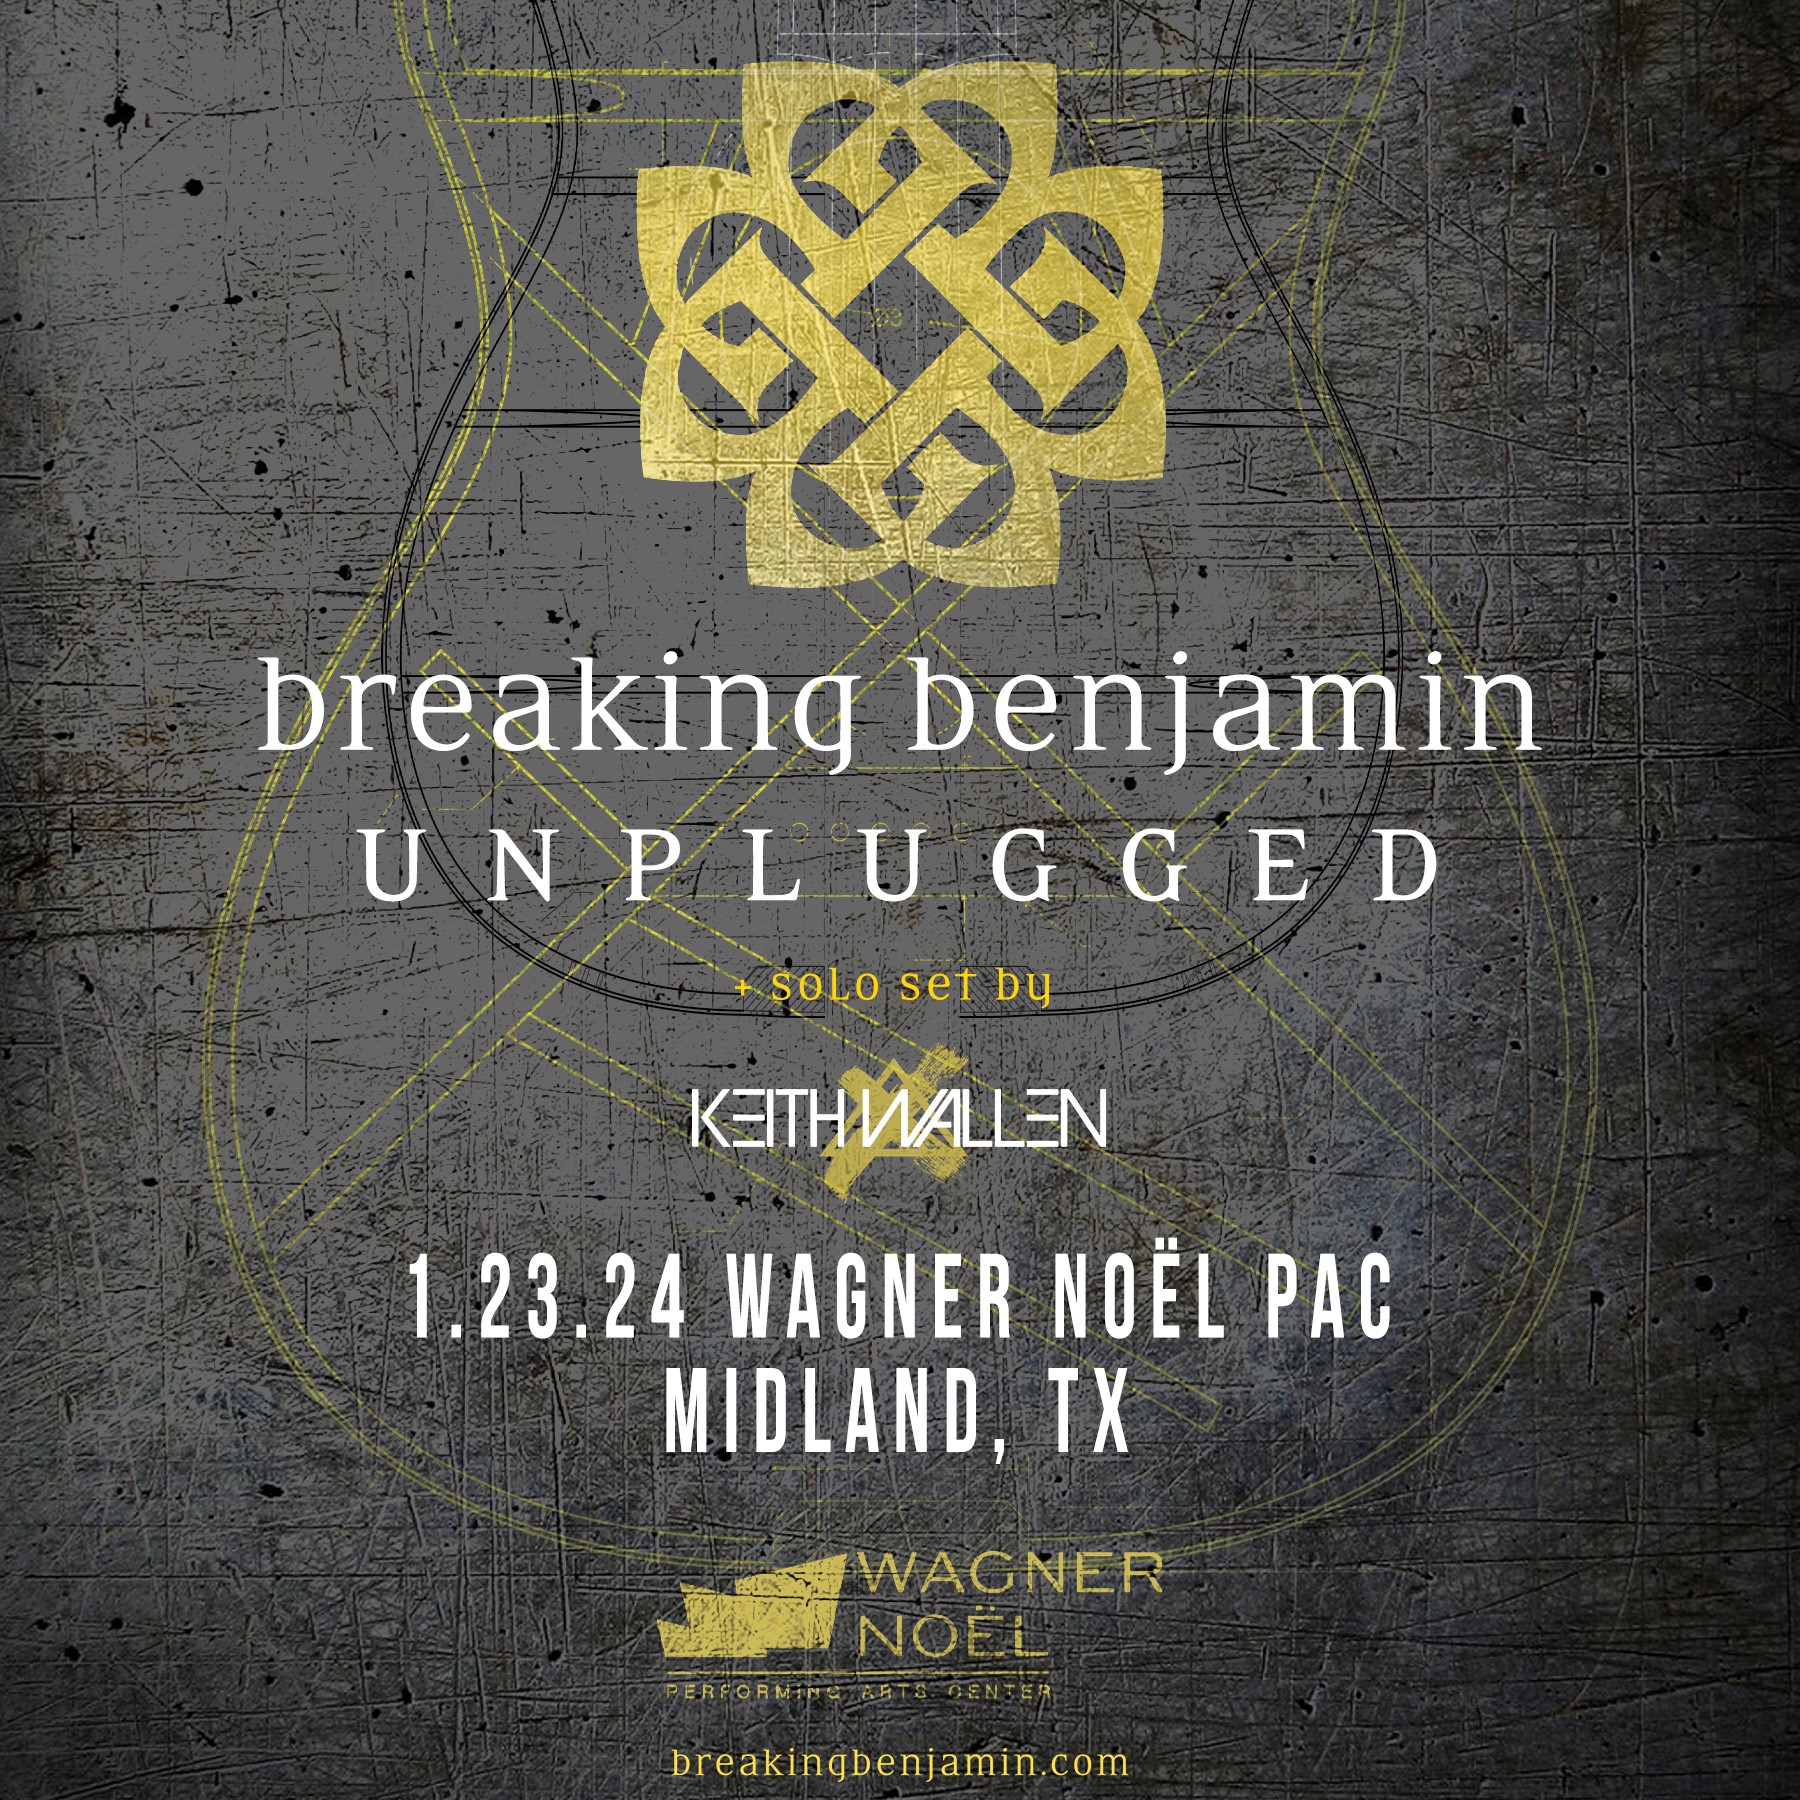 Breaking Benjamin: Unplugged is Coming to Wagner Noël PAC